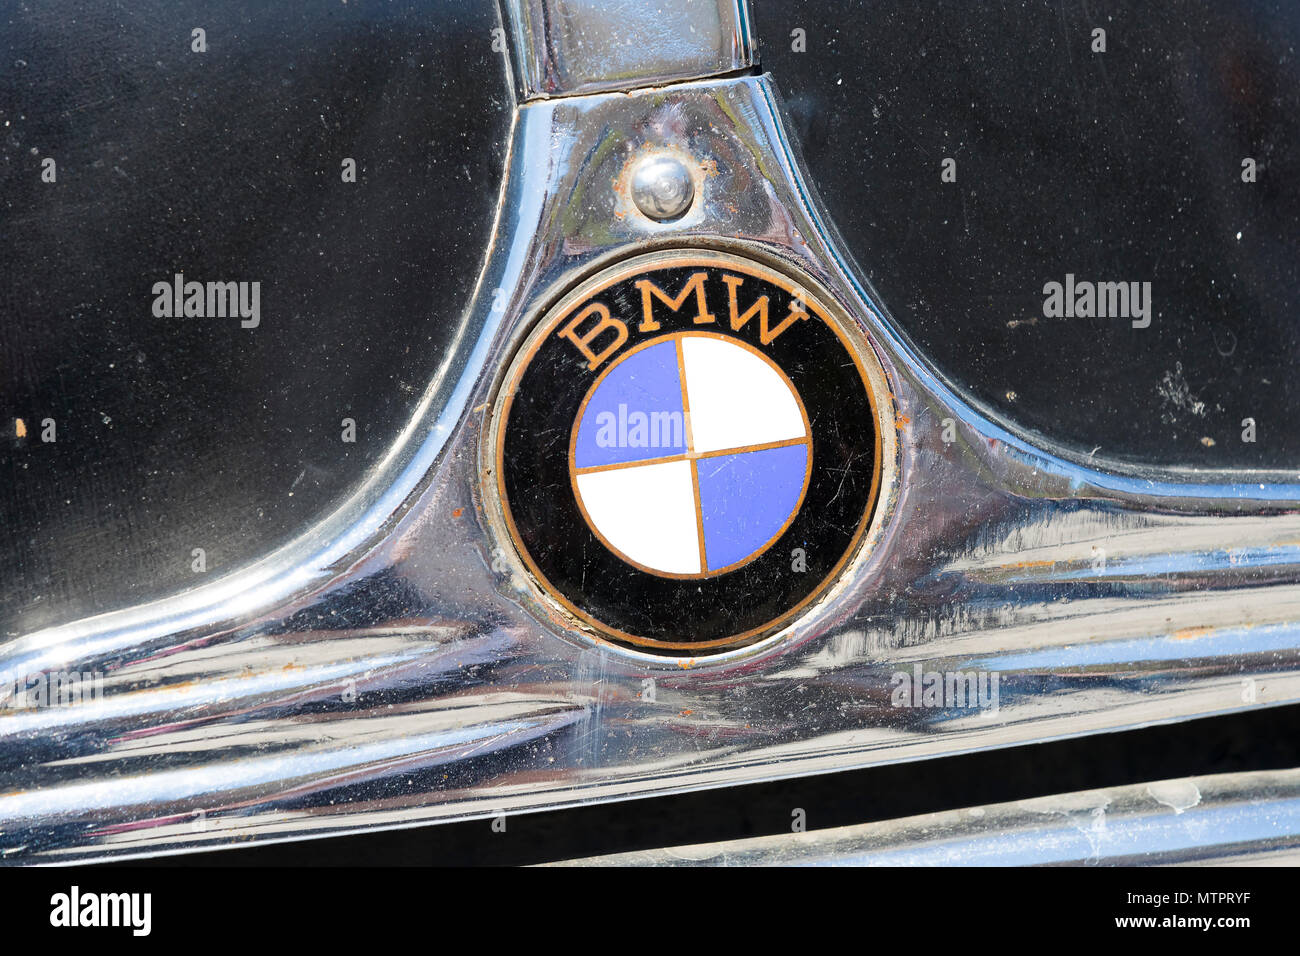 KHARKIV, UKRAINE - 27 MAY, 2018: The emblem of the car is a retro old BMW close-up. Stock Photo